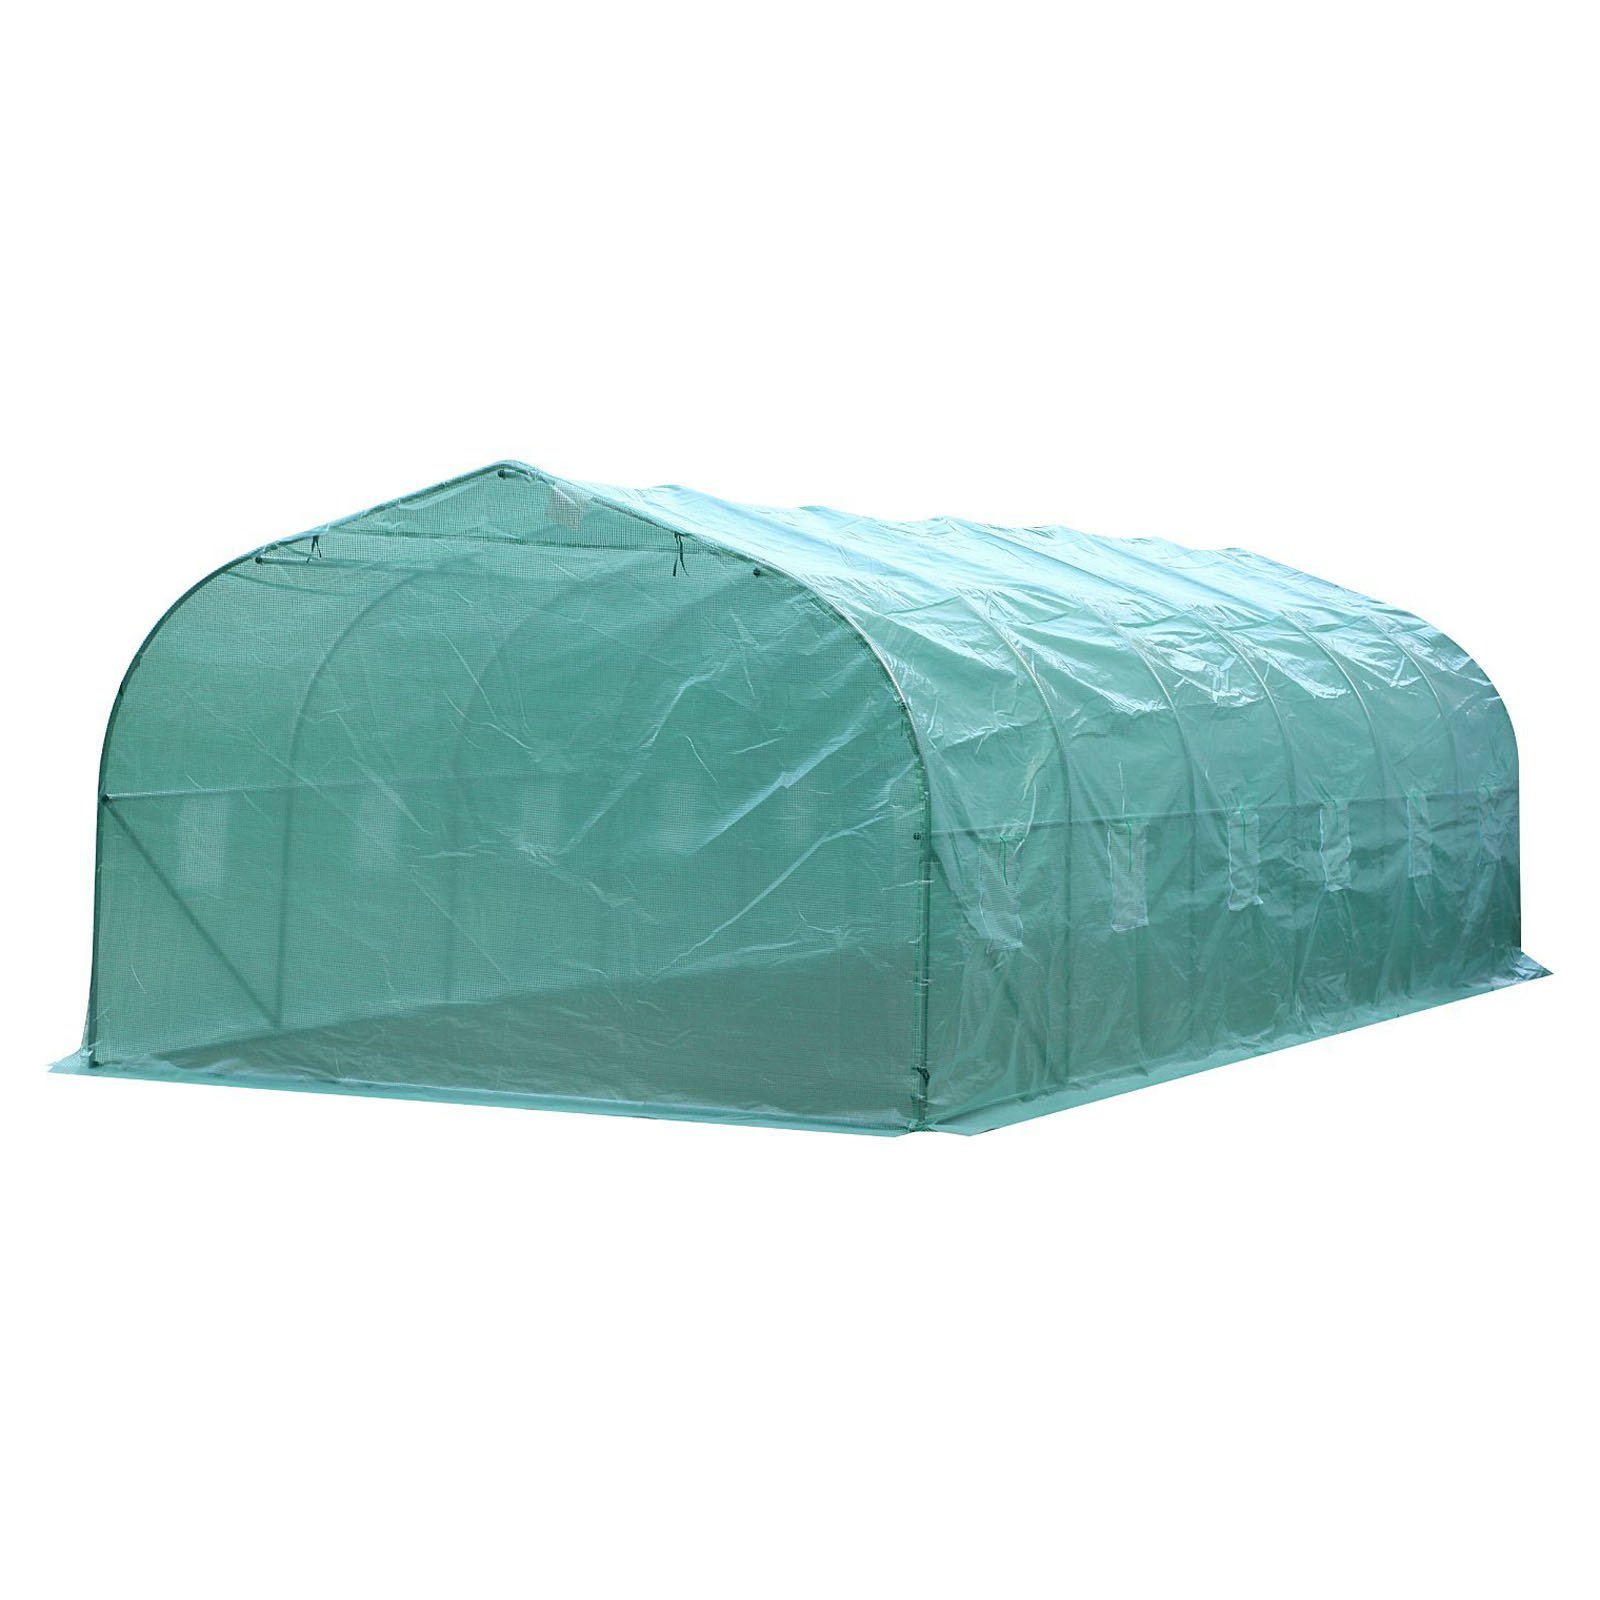 Outsunny 26' x 10' x 6.5' Large Outdoor Heavy Duty Walk-In Greenhouse with 12 Windows & Netted Ventilation Screens, White - image 1 of 7